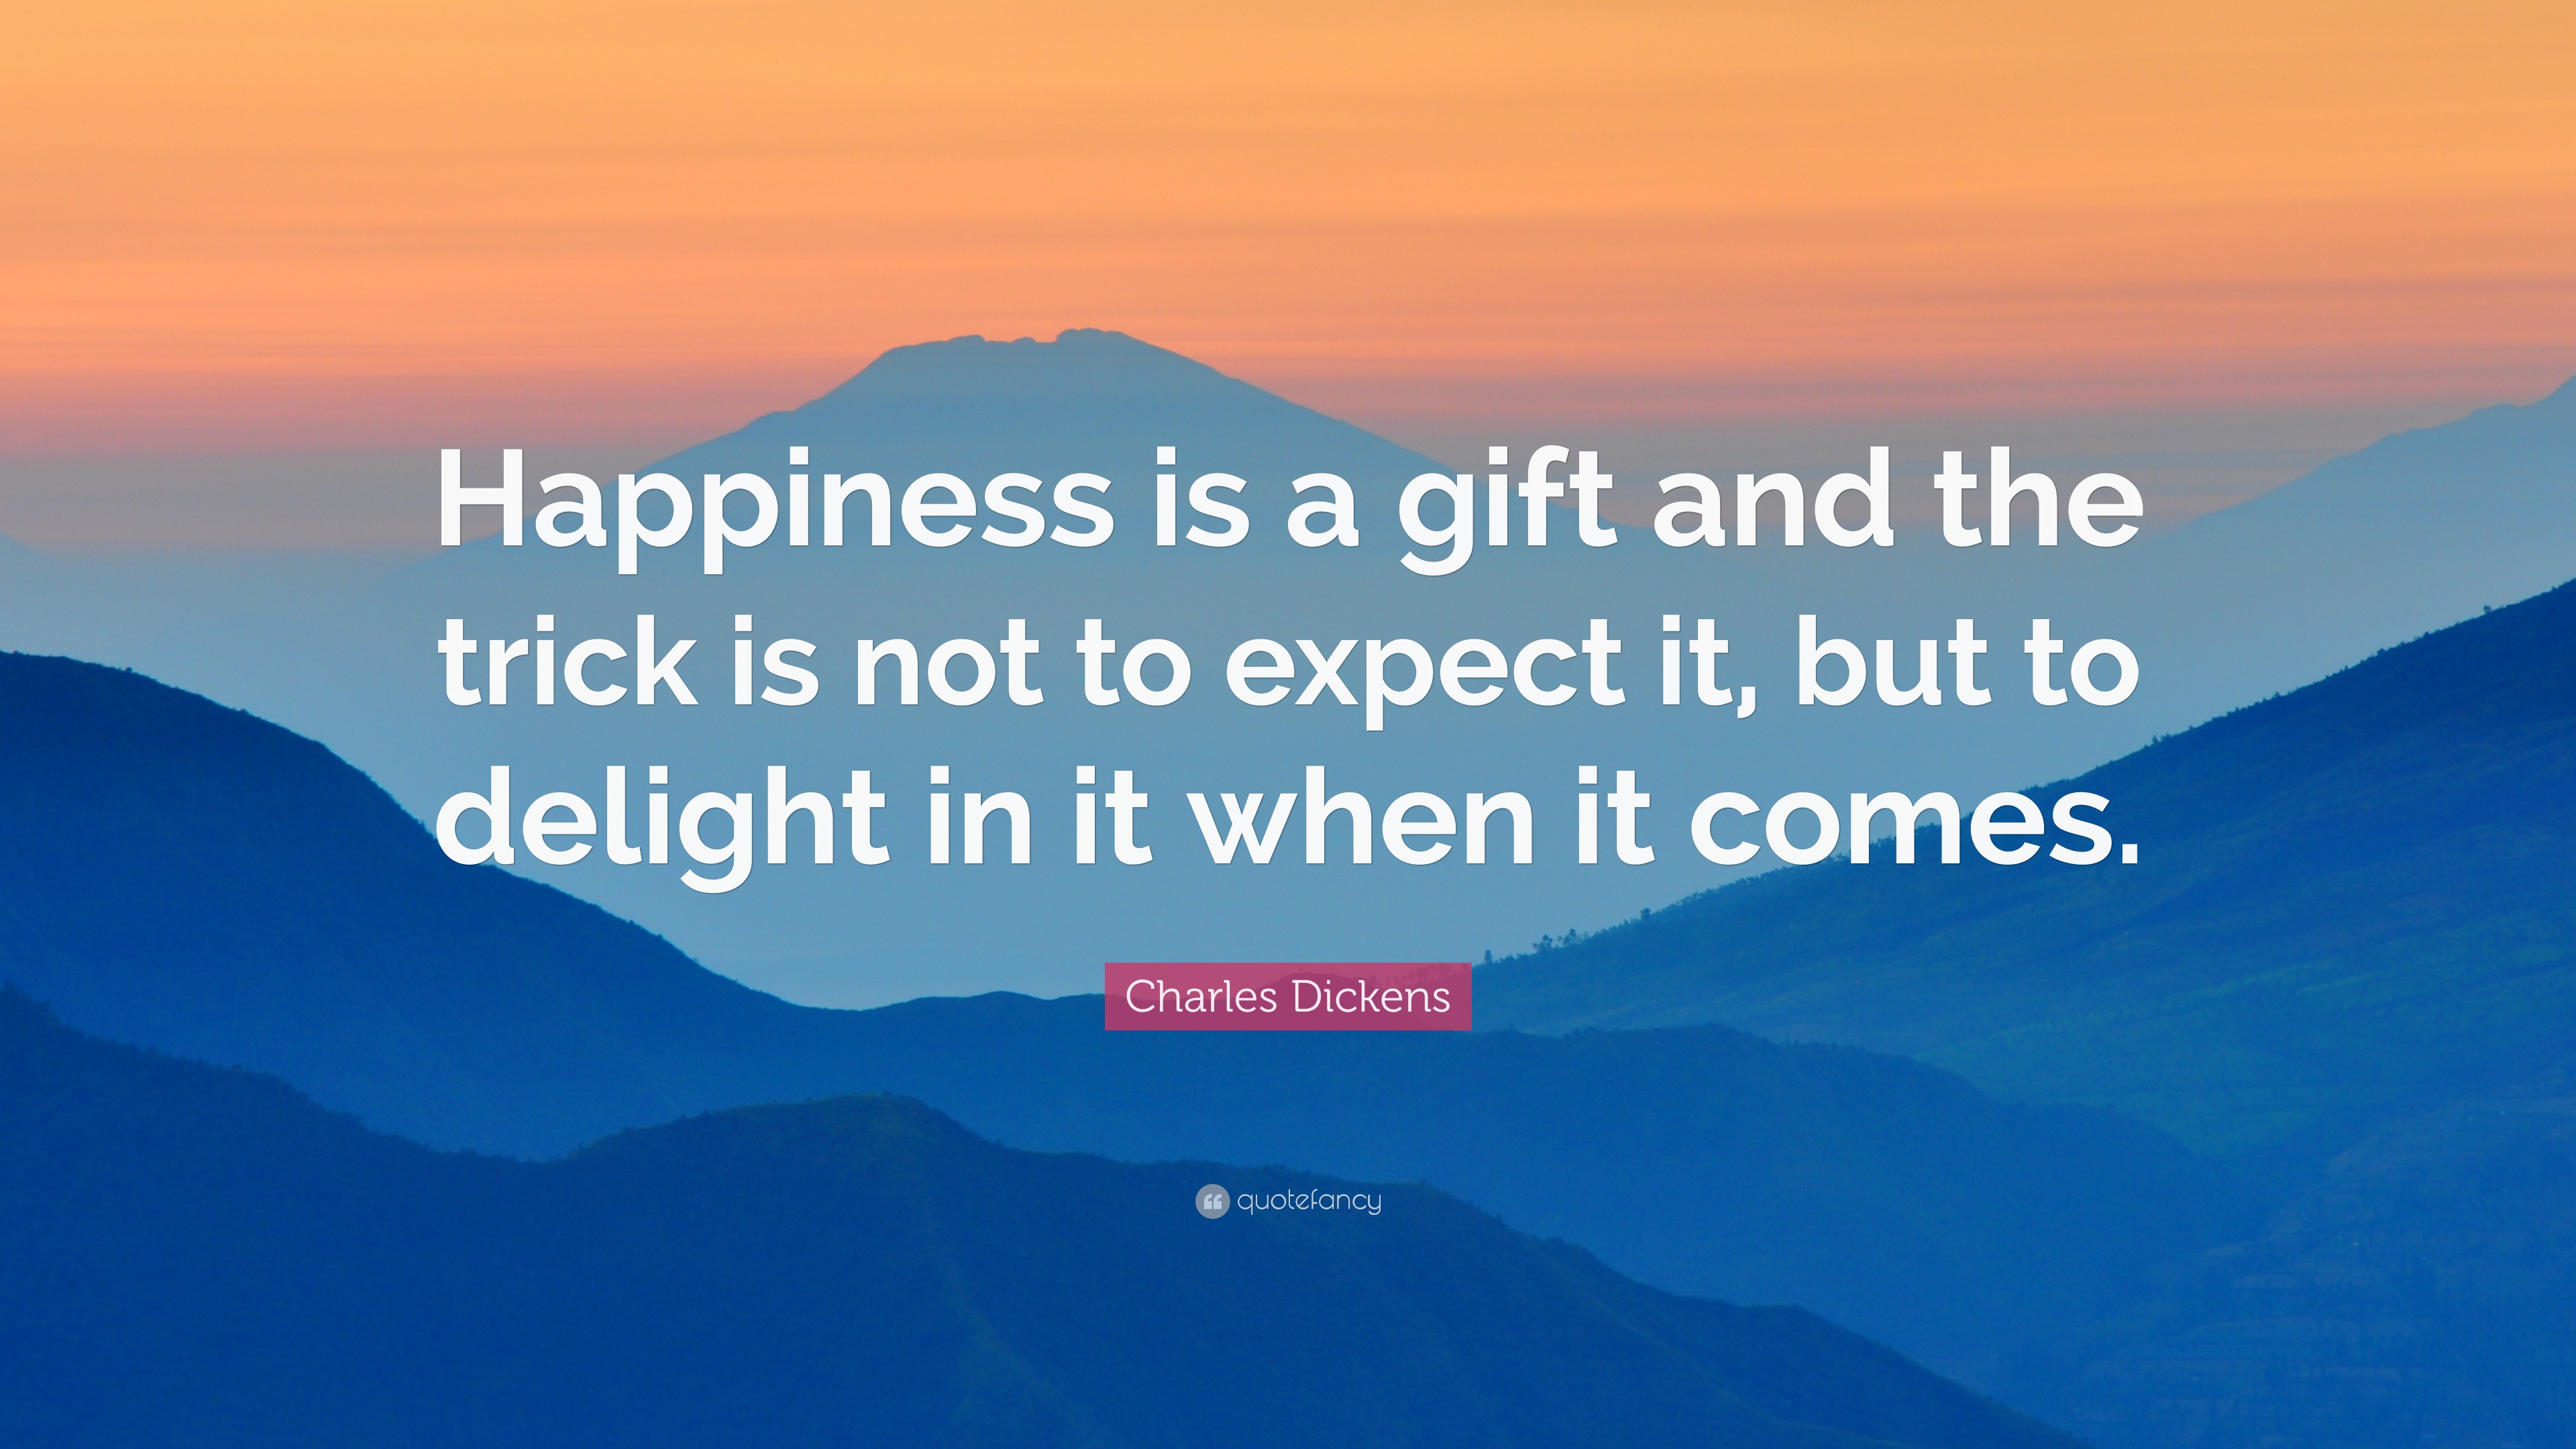 Bookmark Charles Dickens Happiness is a Gift and the trick is not to expect it but to Delight in it when it comes 